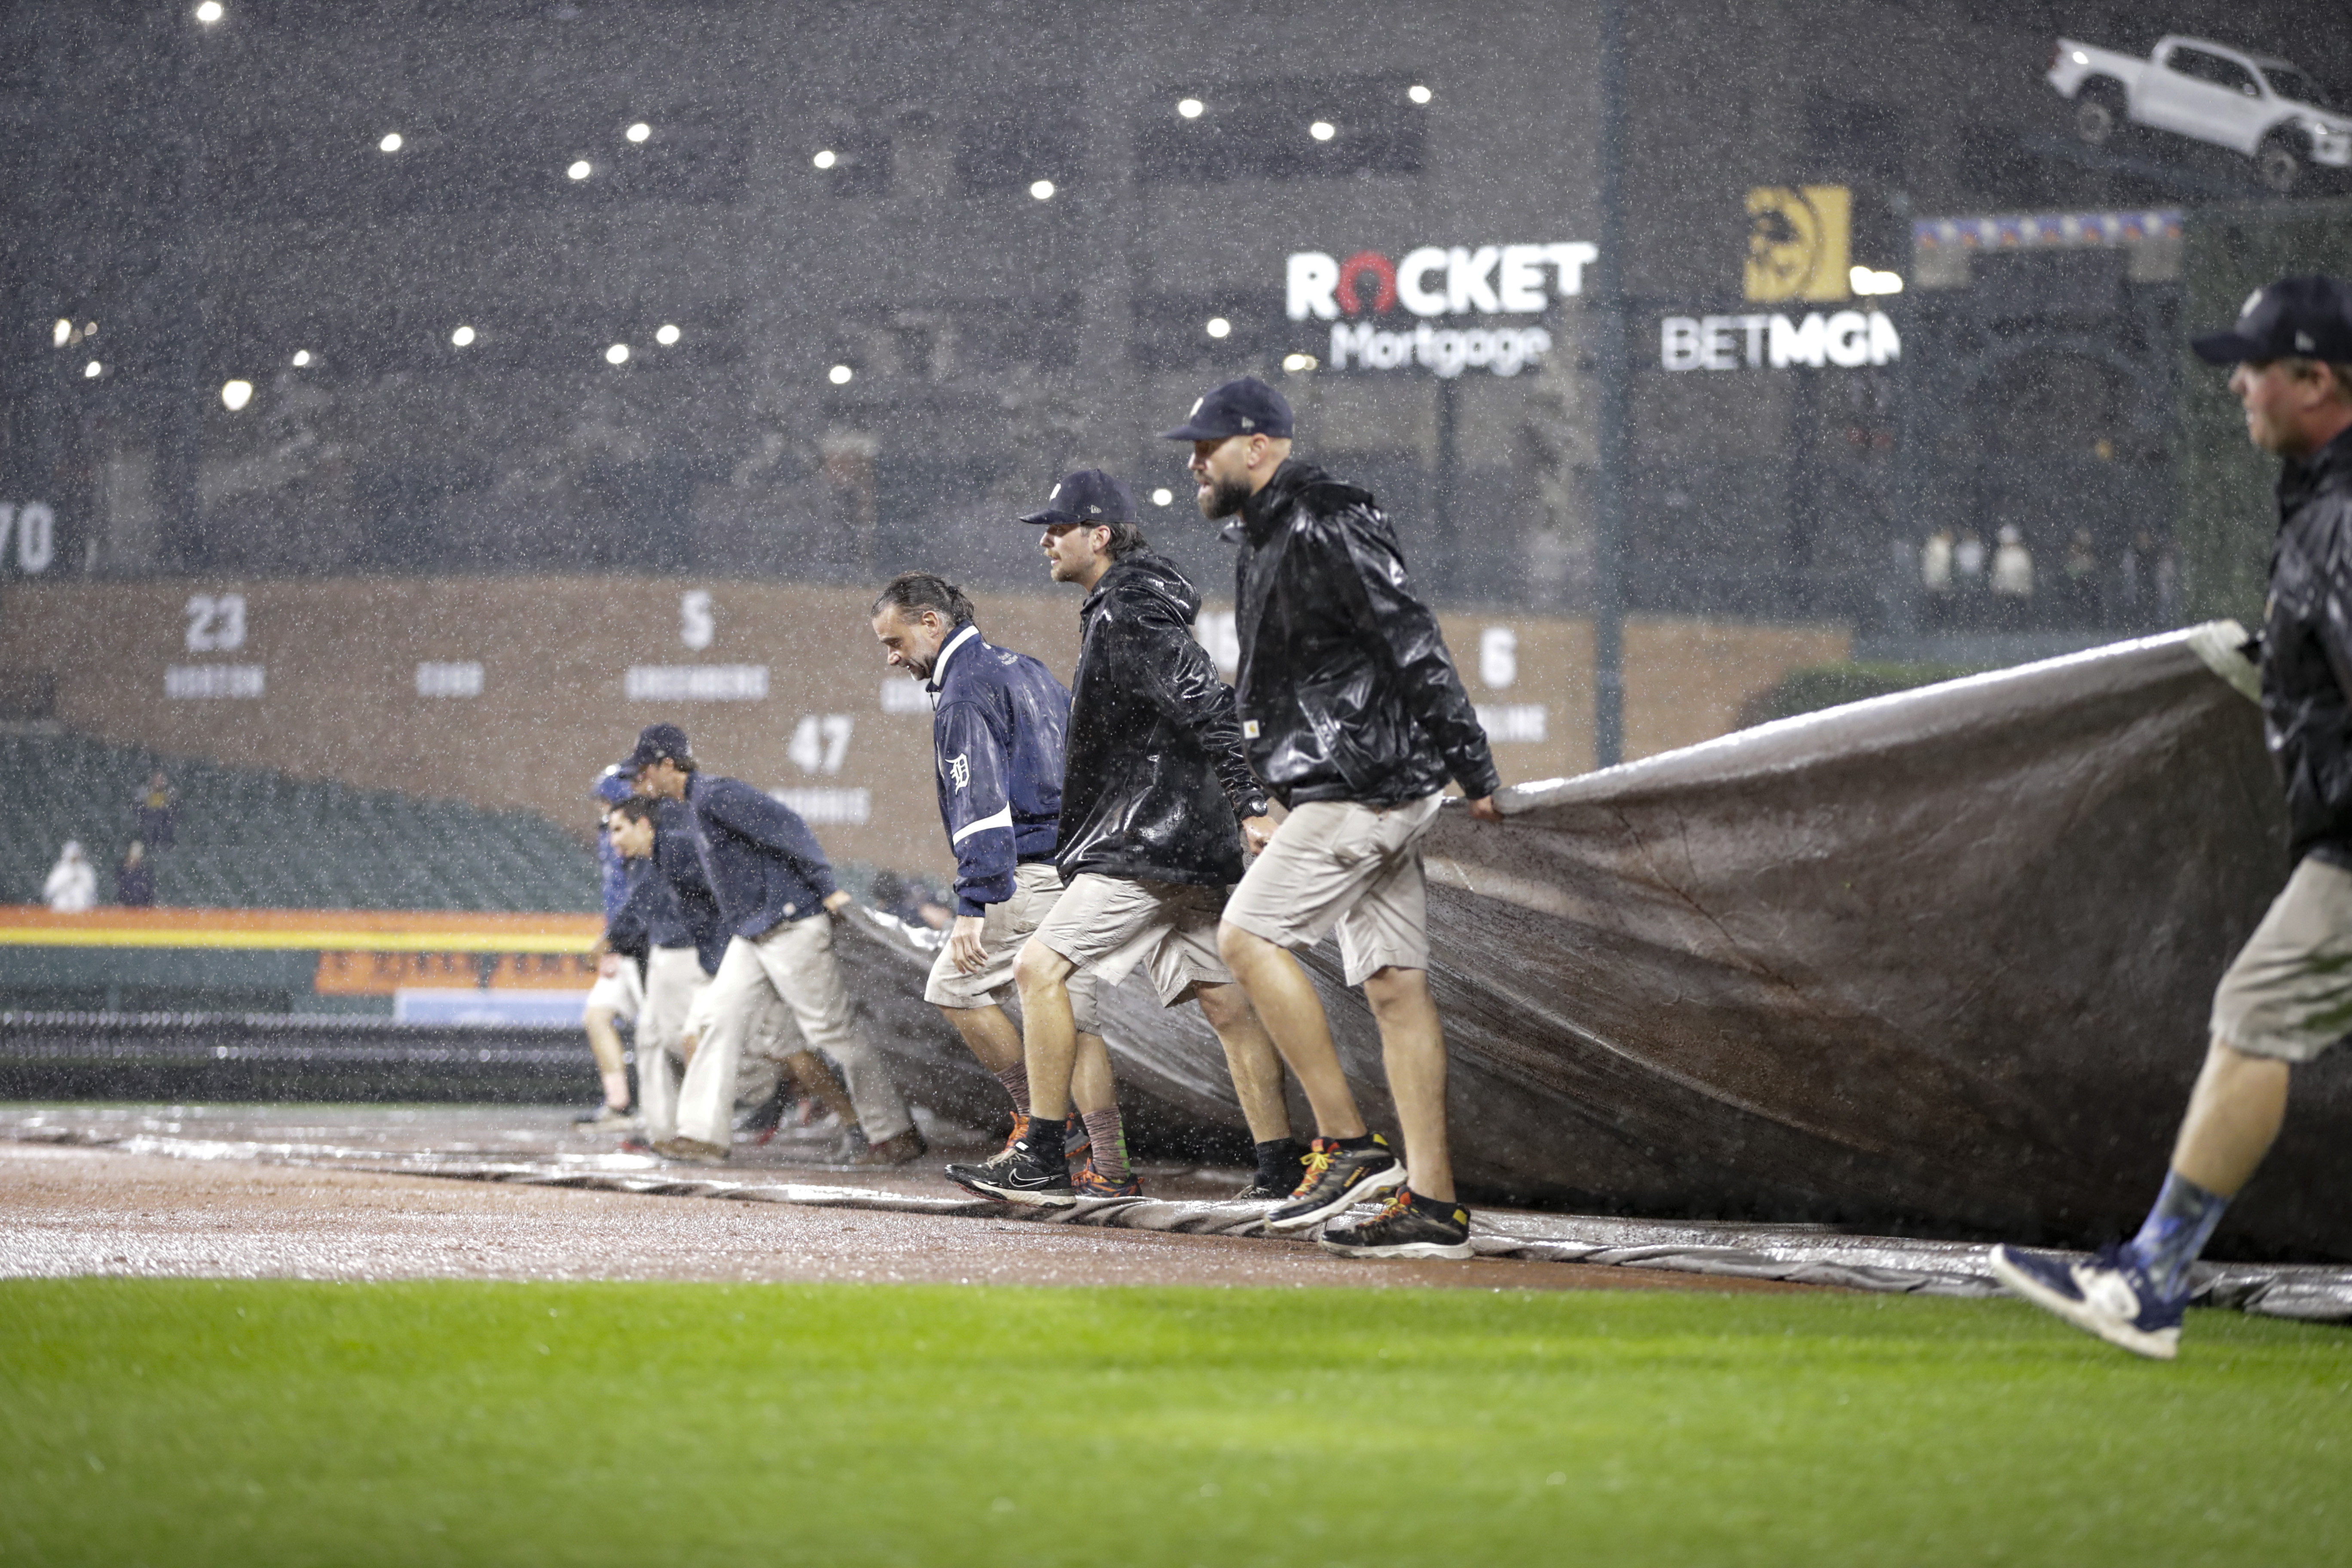 Tigers lead Royals in game suspended after 4 innings